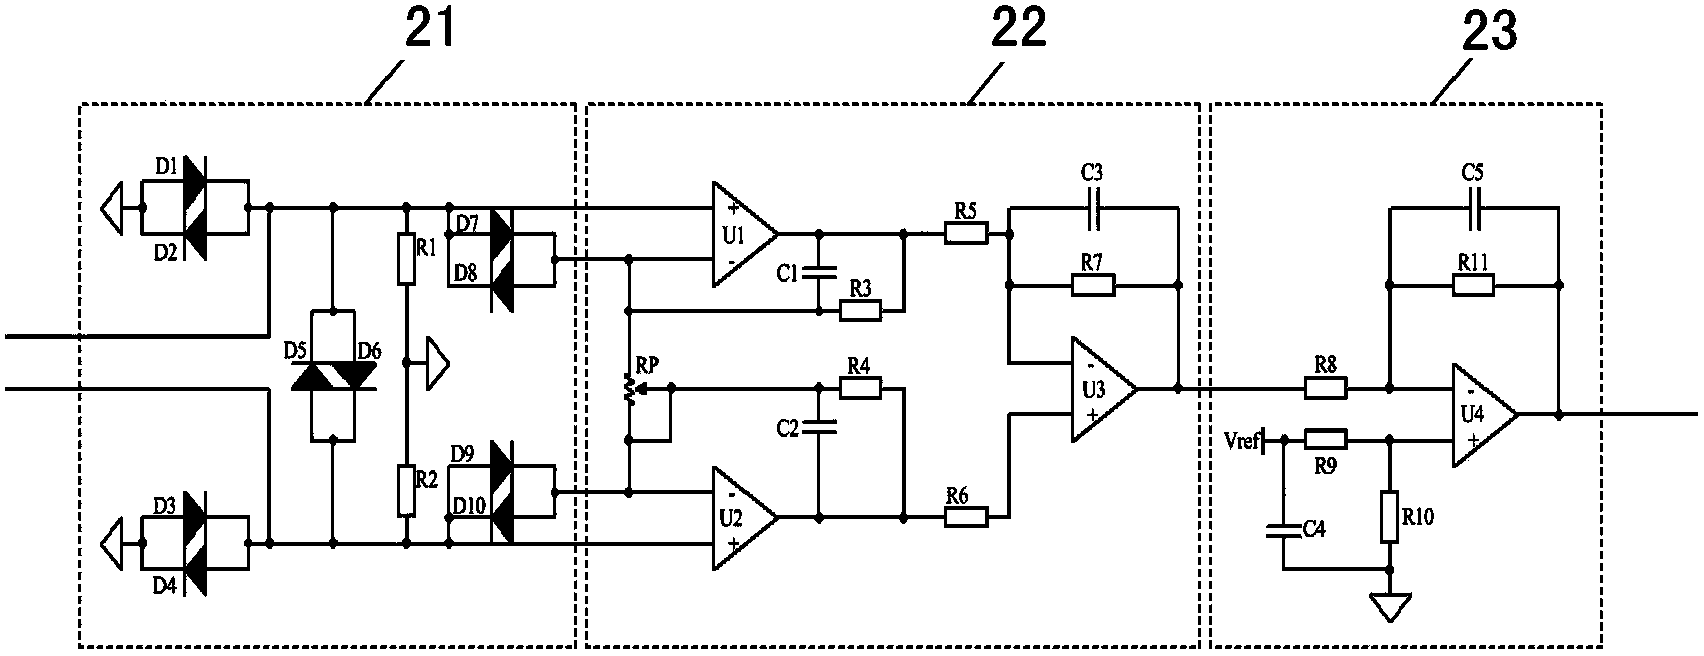 Zinc oxide arrester live detection device free of external connection with alternating-current power supply